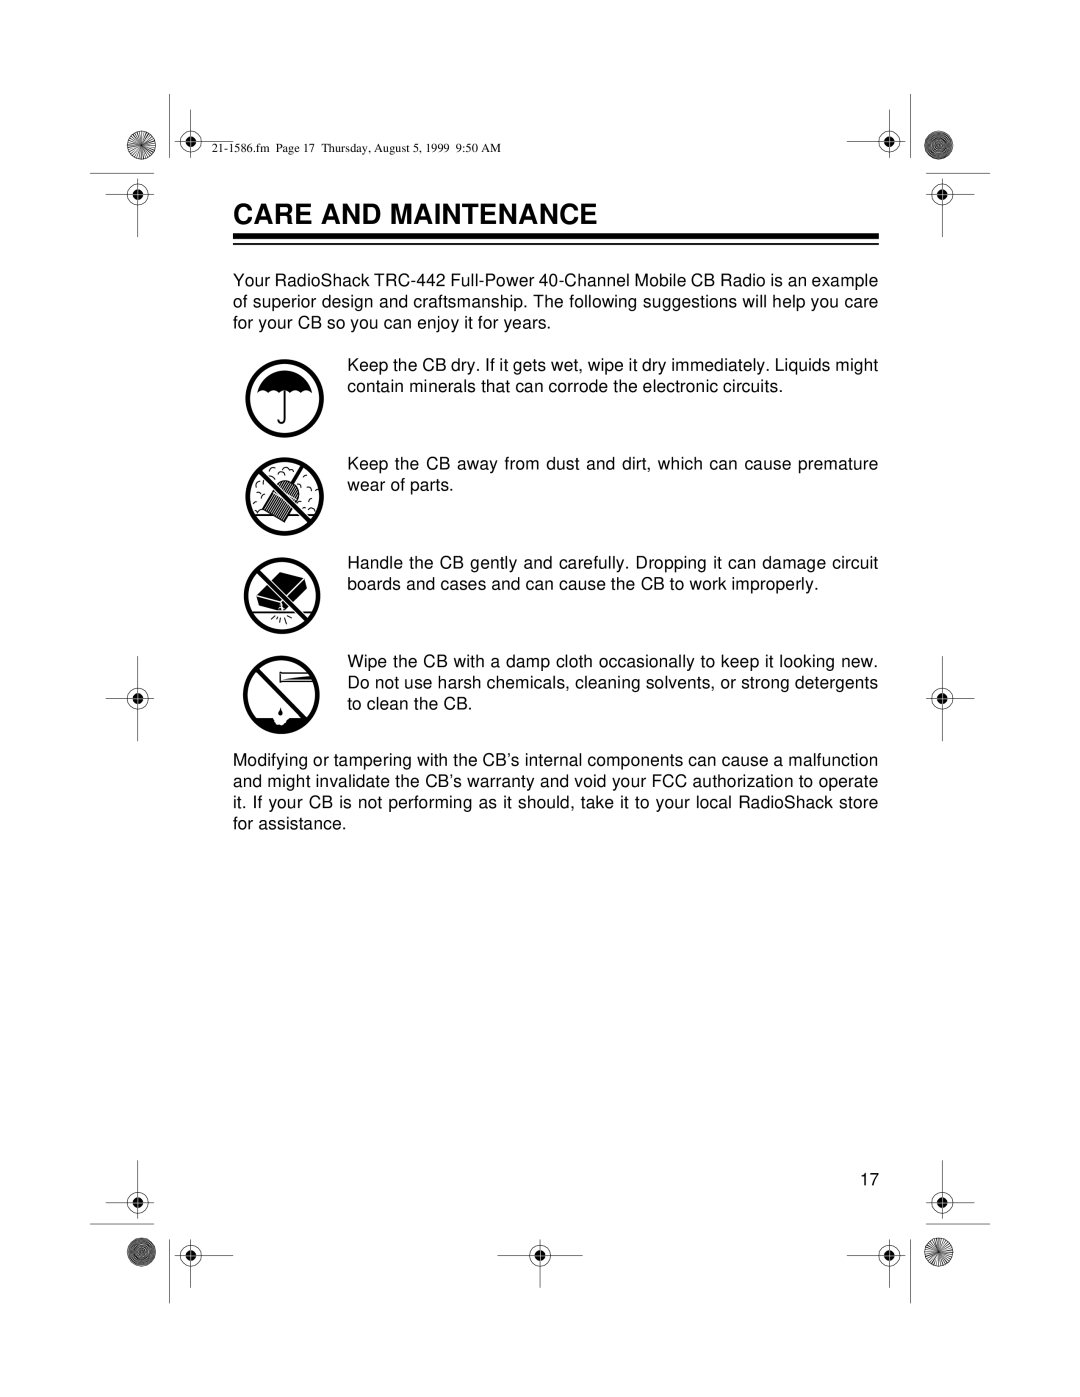 Radio Shack TRC-442 owner manual Care And Maintenance 